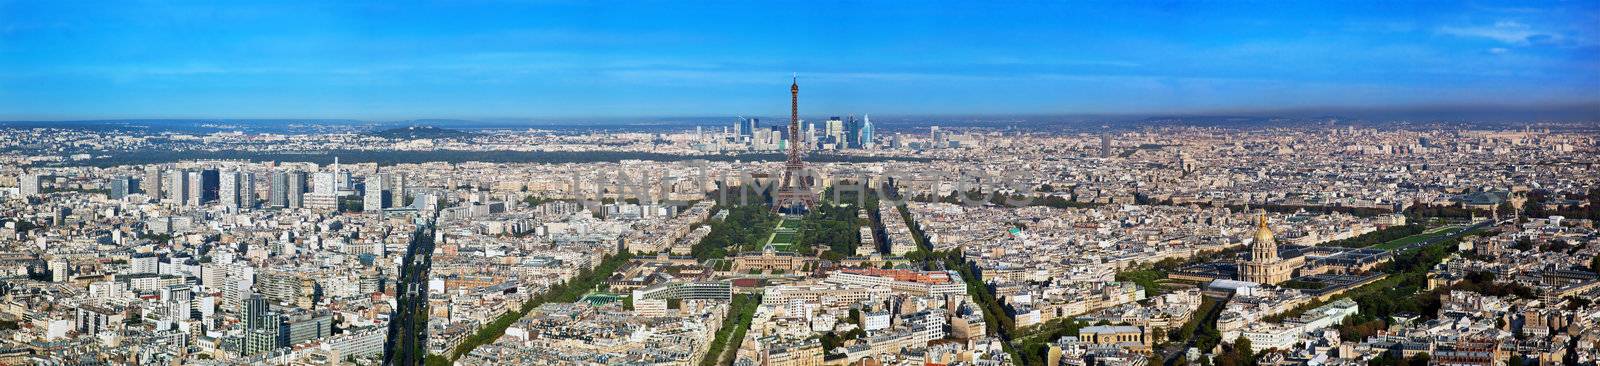 Paris panorama, France. Eiffel Tower, Les Invalides. by photocreo